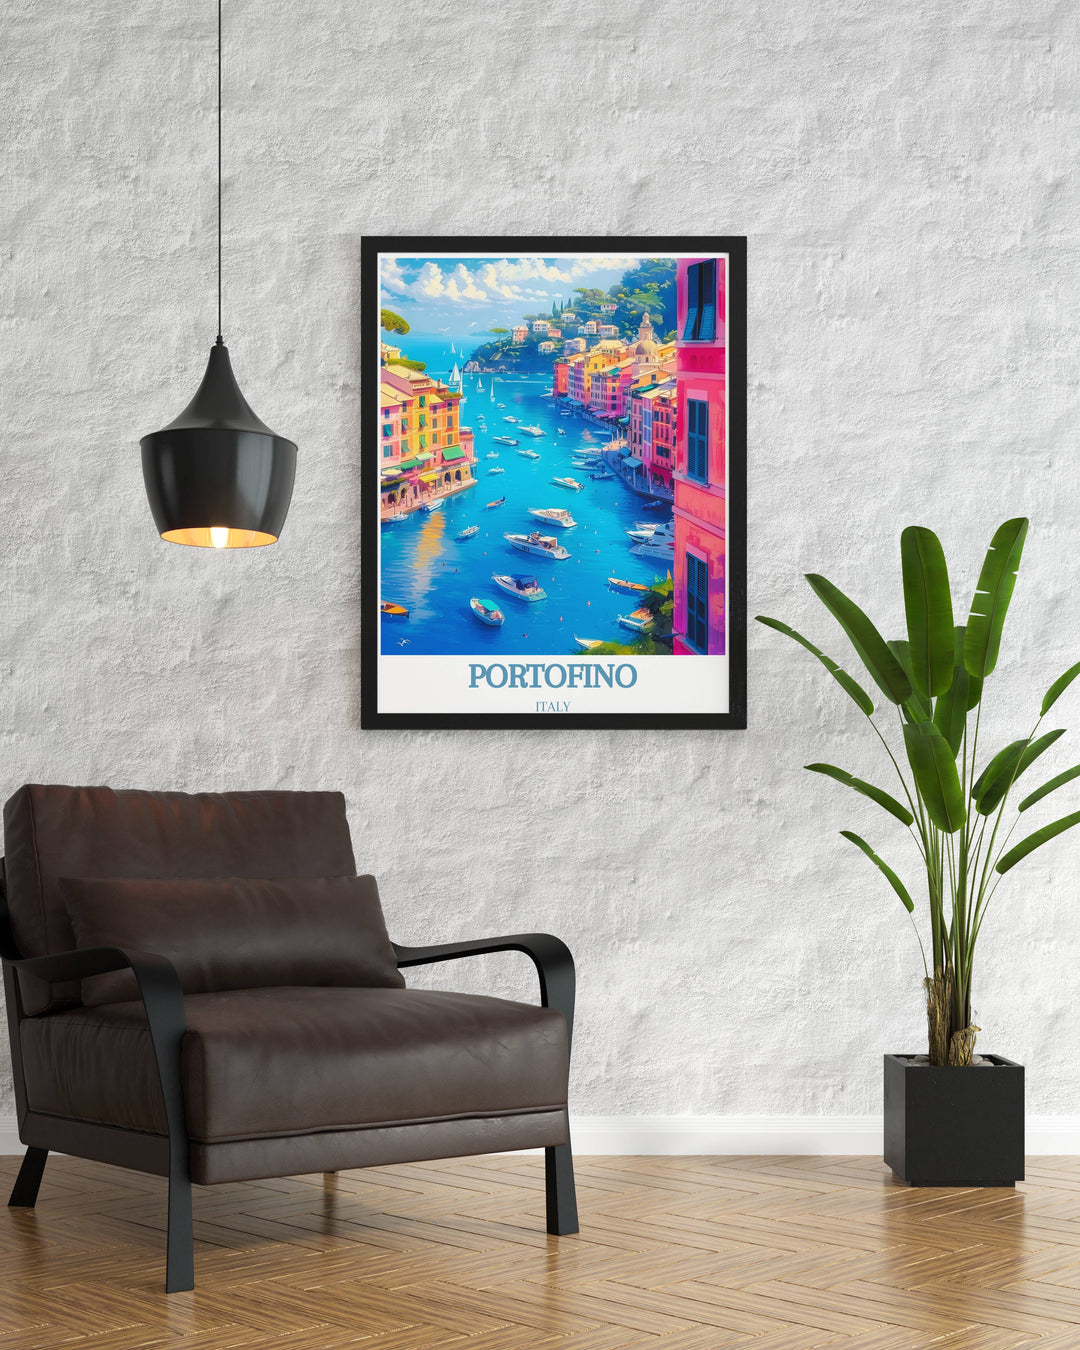 Portofino Poster featuring the idyllic scenery of the Italian Riviera, with its serene harbor and lush greenery, offering a visual escape to this Mediterranean gem.